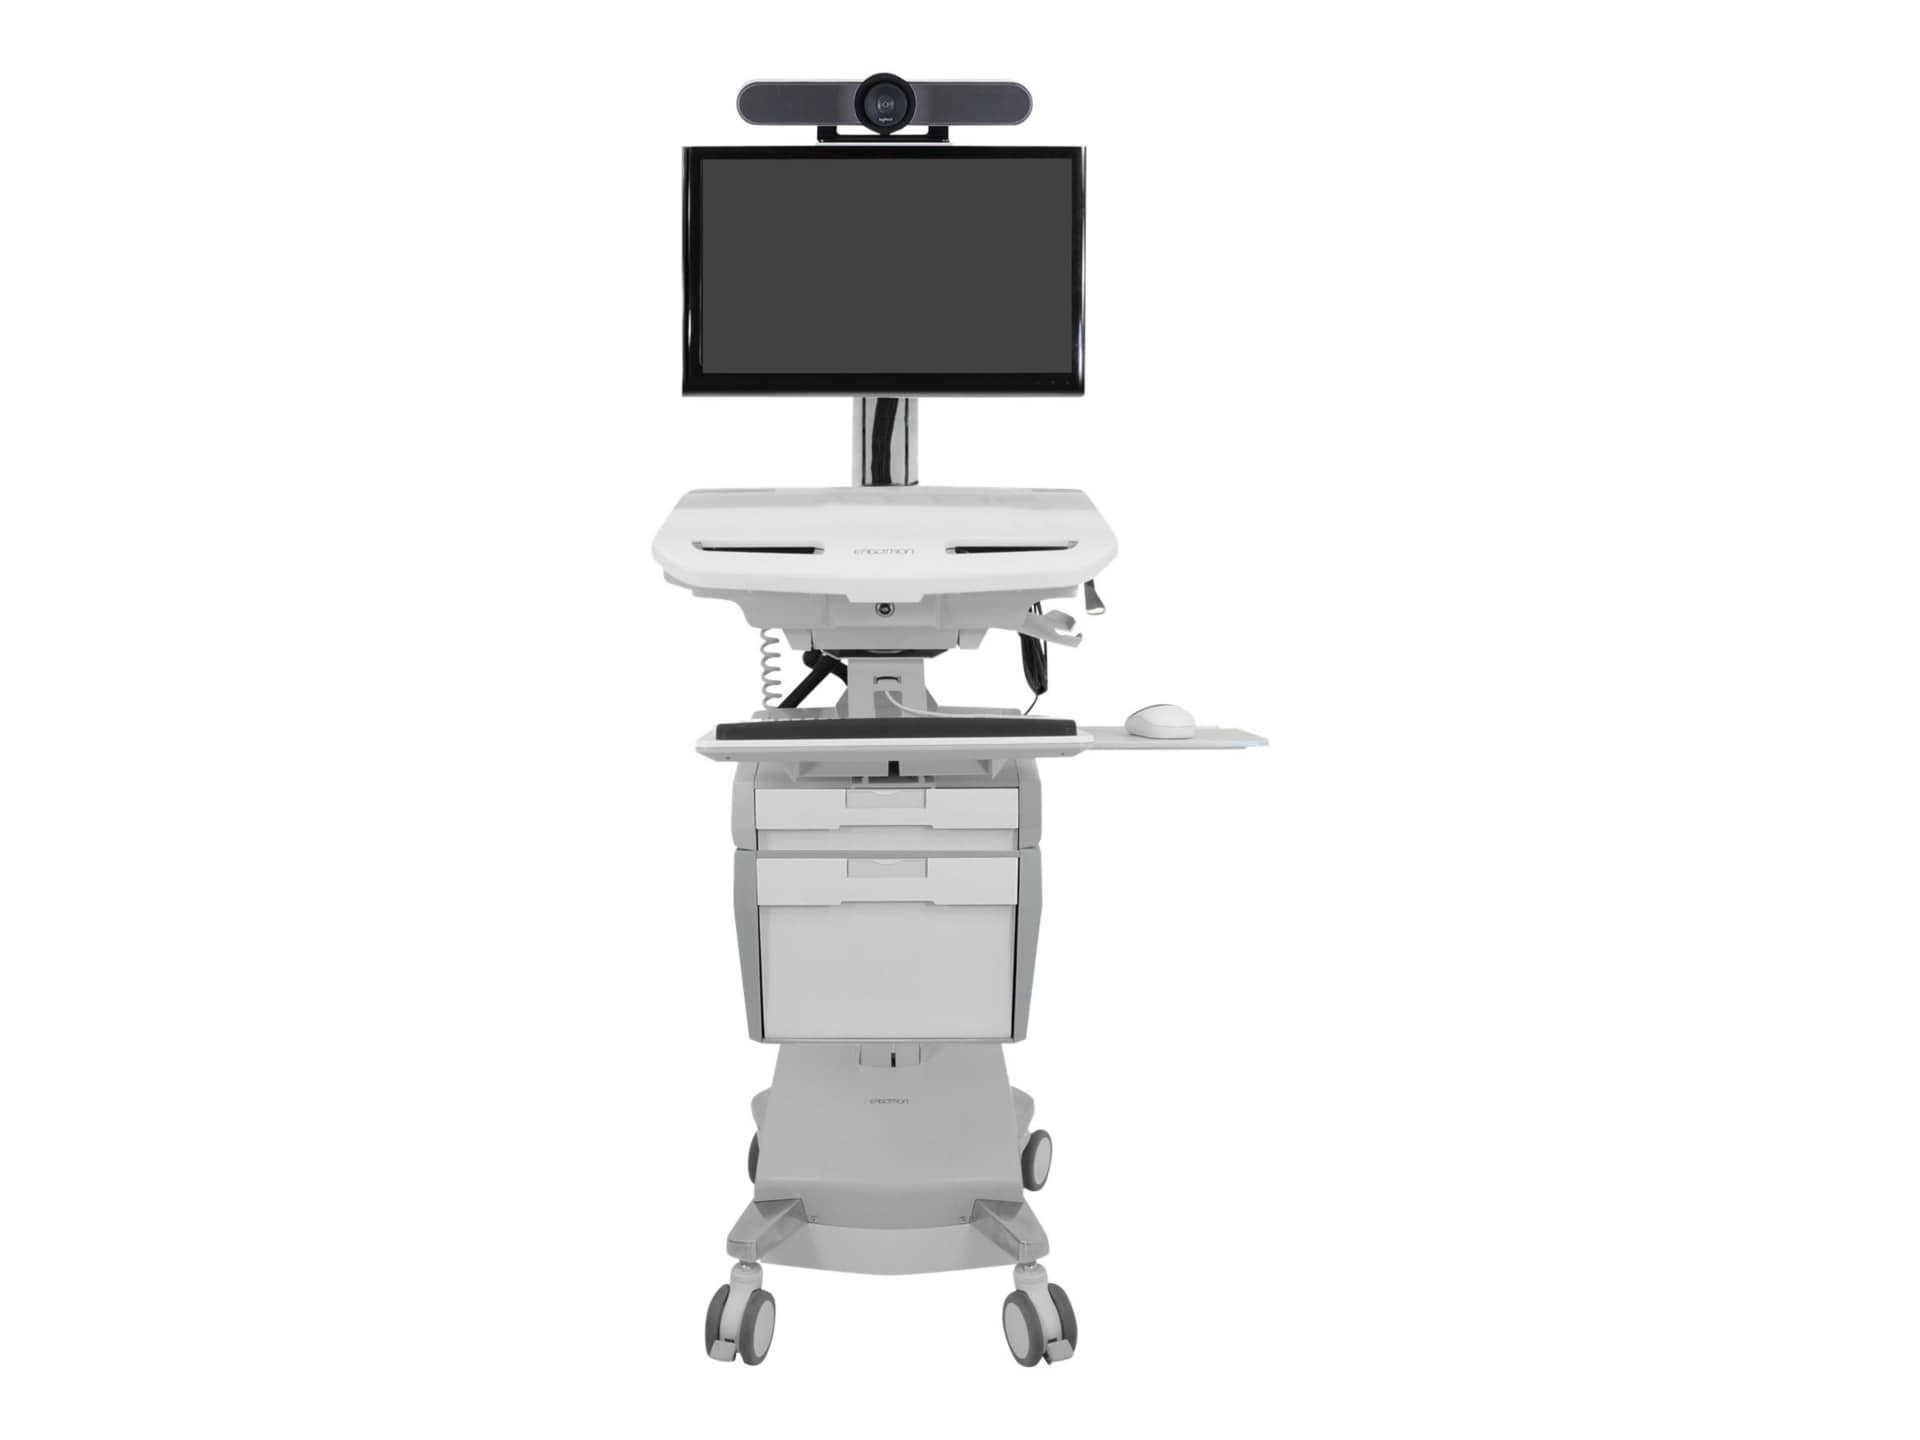 Ergotron StyleView Telemedicine cart - open architecture - for LCD display / keyboard / mouse / CPU / notebook / camera